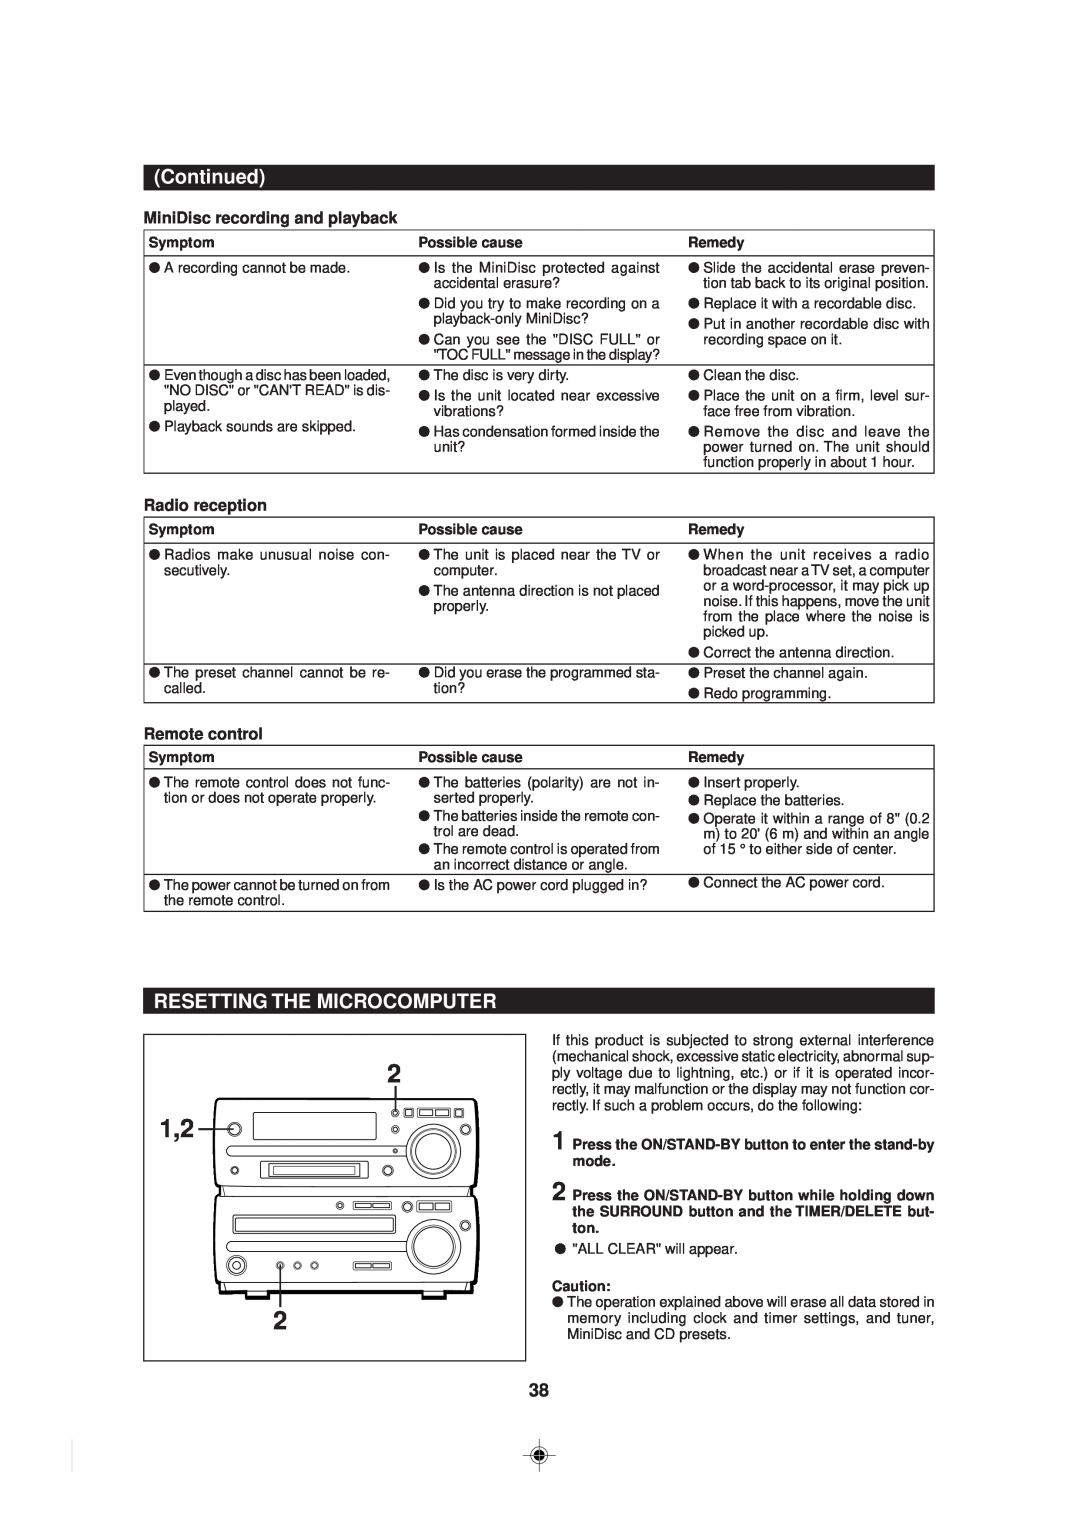 Sharp MD-MX30 MD operation manual 2 1,2, Resetting The Microcomputer, Continued 